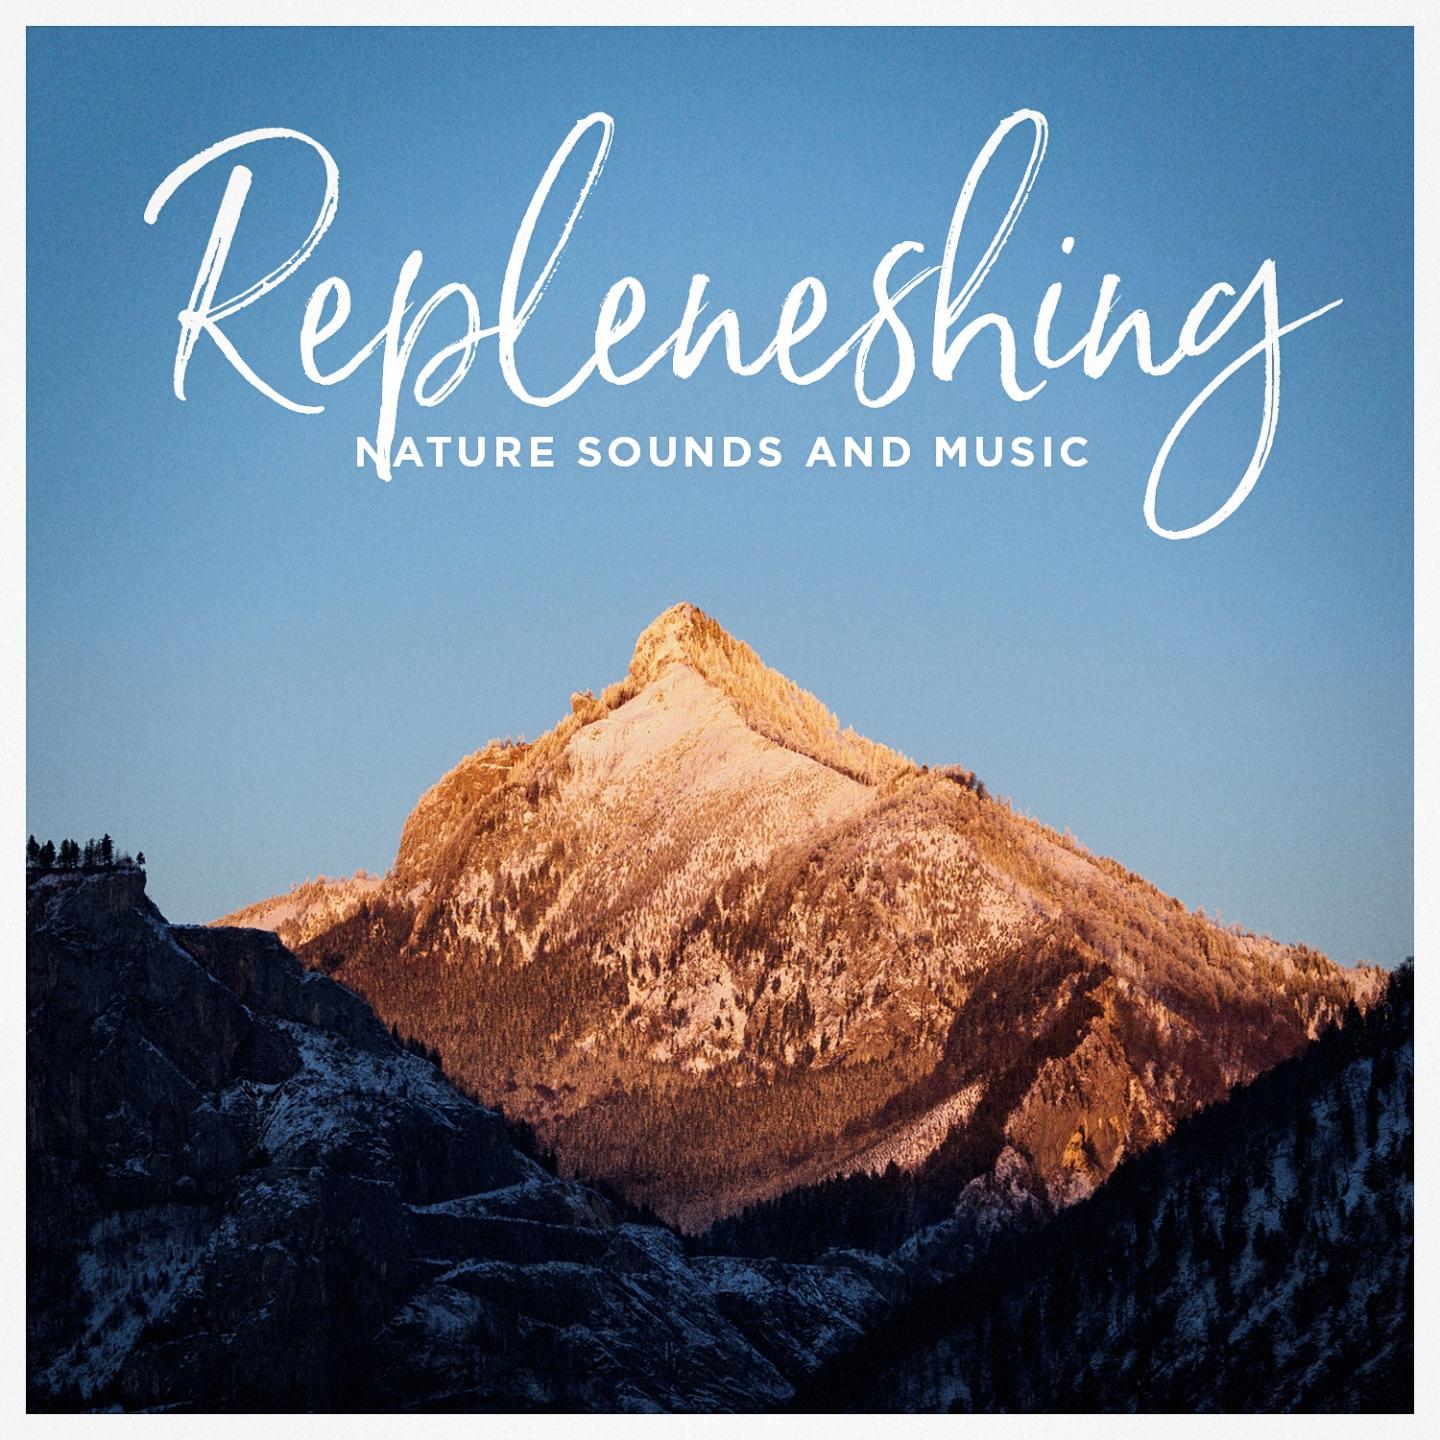 Repleneshing nature sounds and music